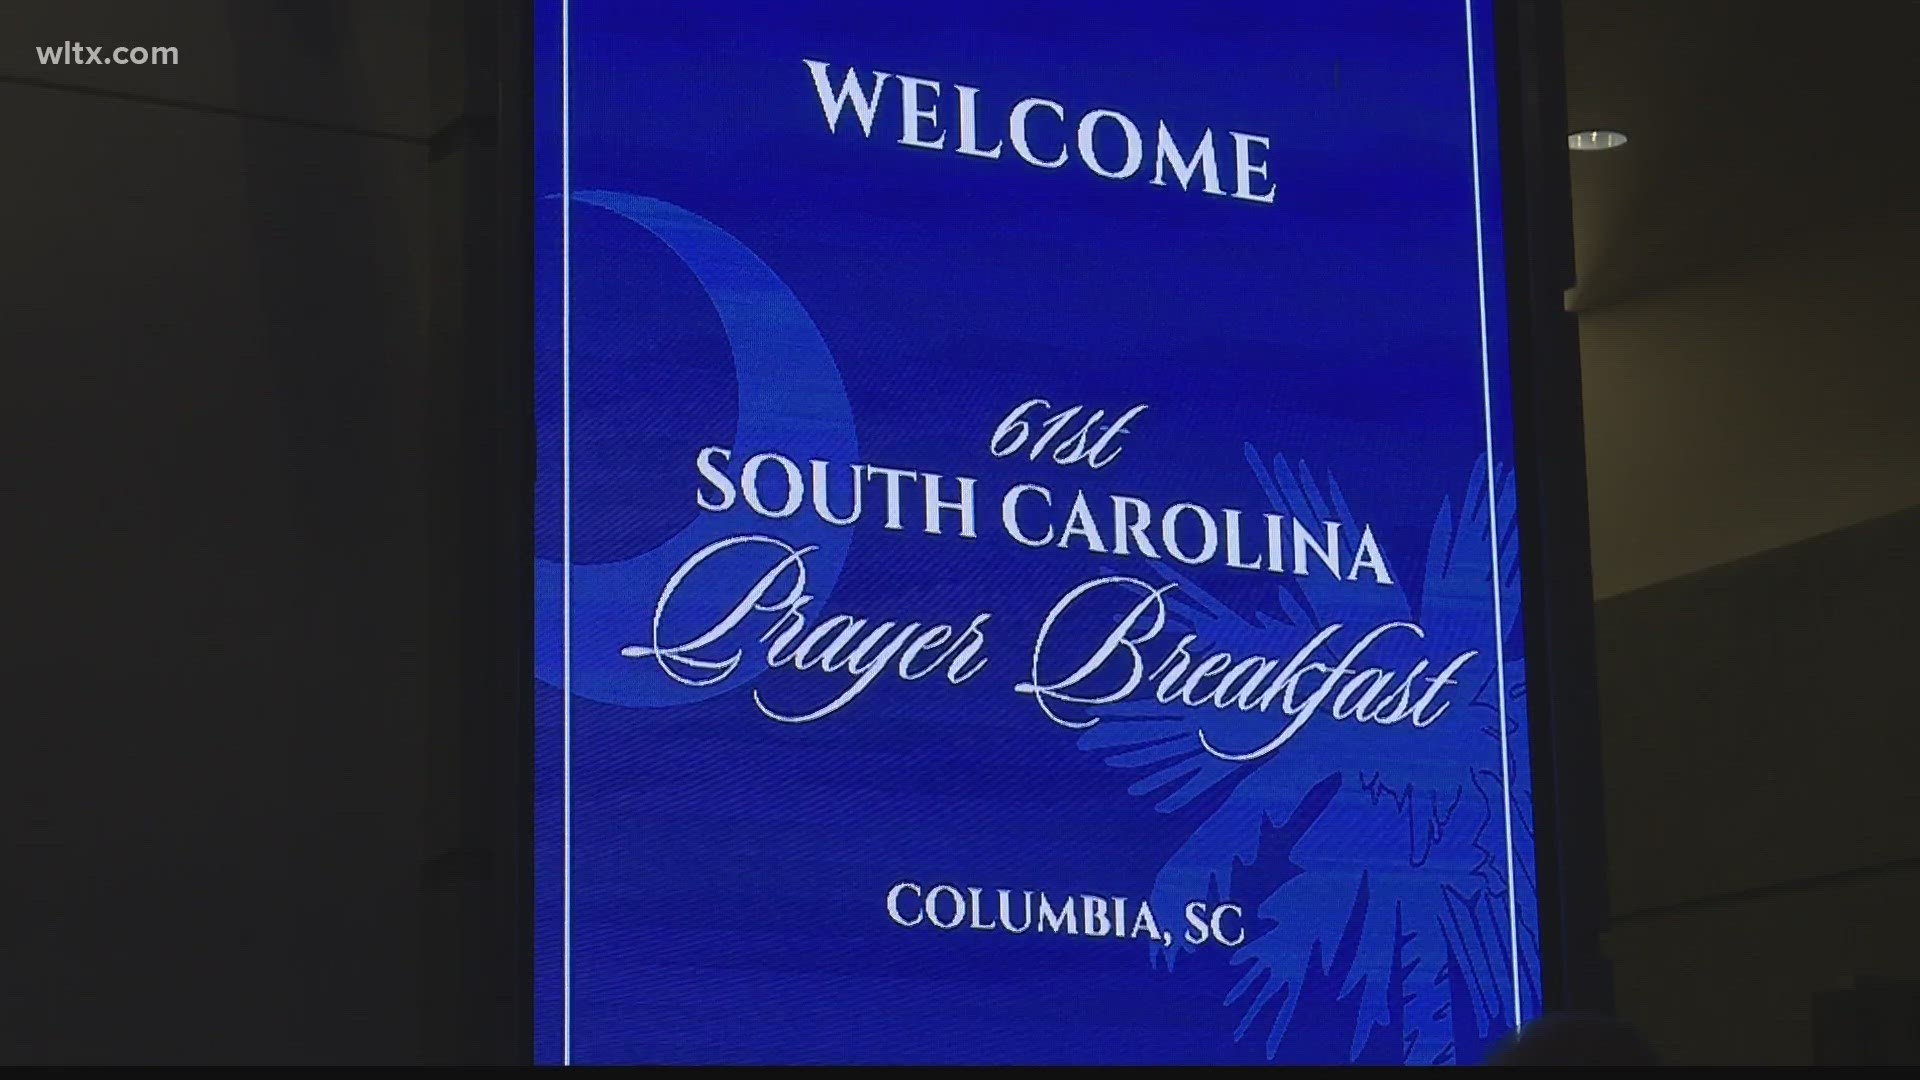 The annual South Carolina Prayer Breakfast was held at the Columbia Convention Center.